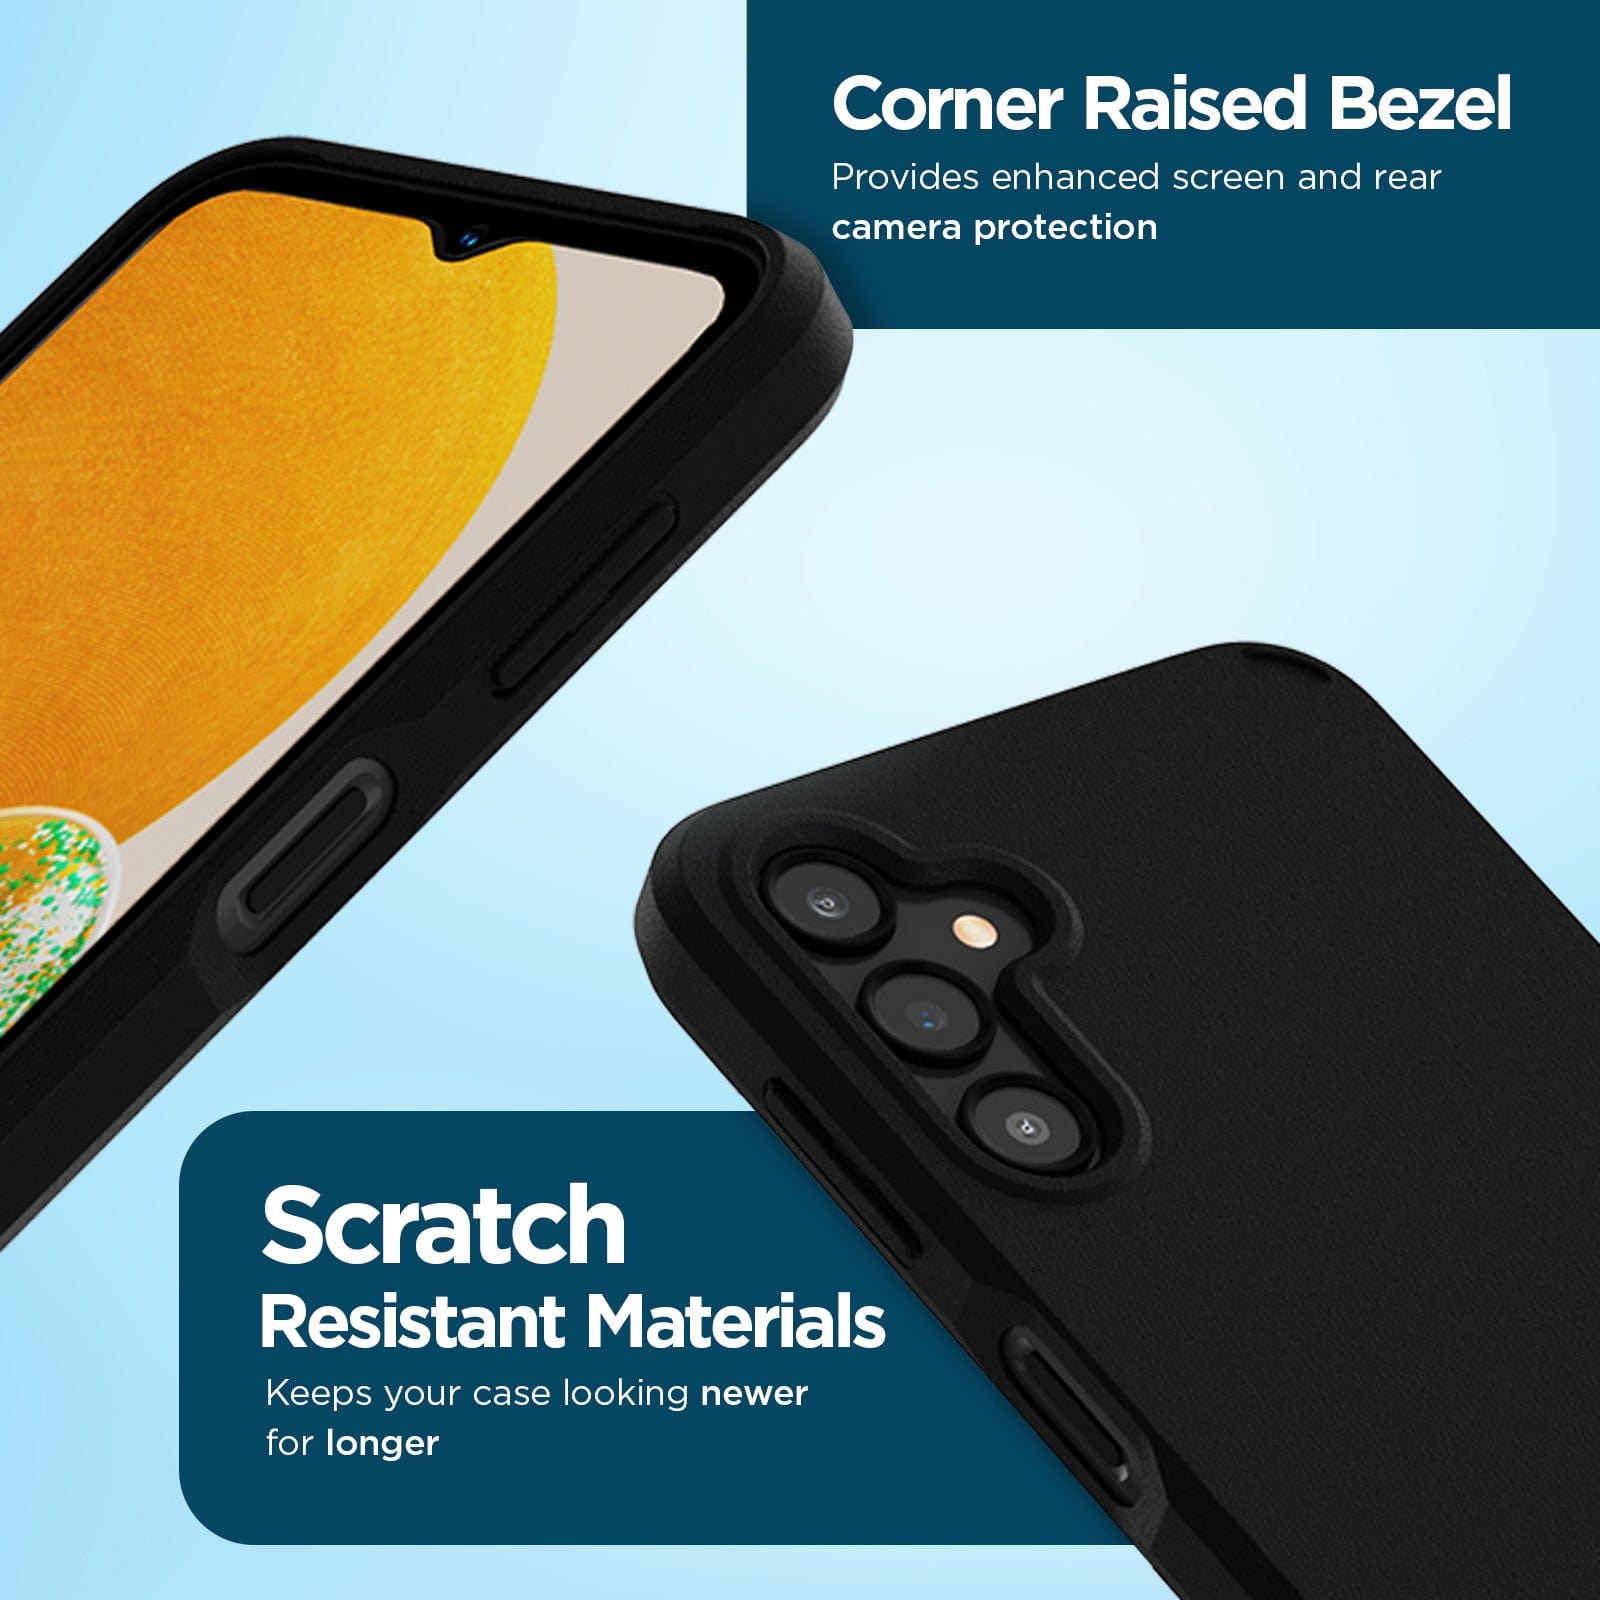 CORNER RAISED BEZEL PROVIDES ENHANCED SCREEN AND REAR CAMERA PROTECTION. SCRATCH RESISTANT MATERIALS KEEPS YOUR CASE LOOKING NEWER FOR LONGER